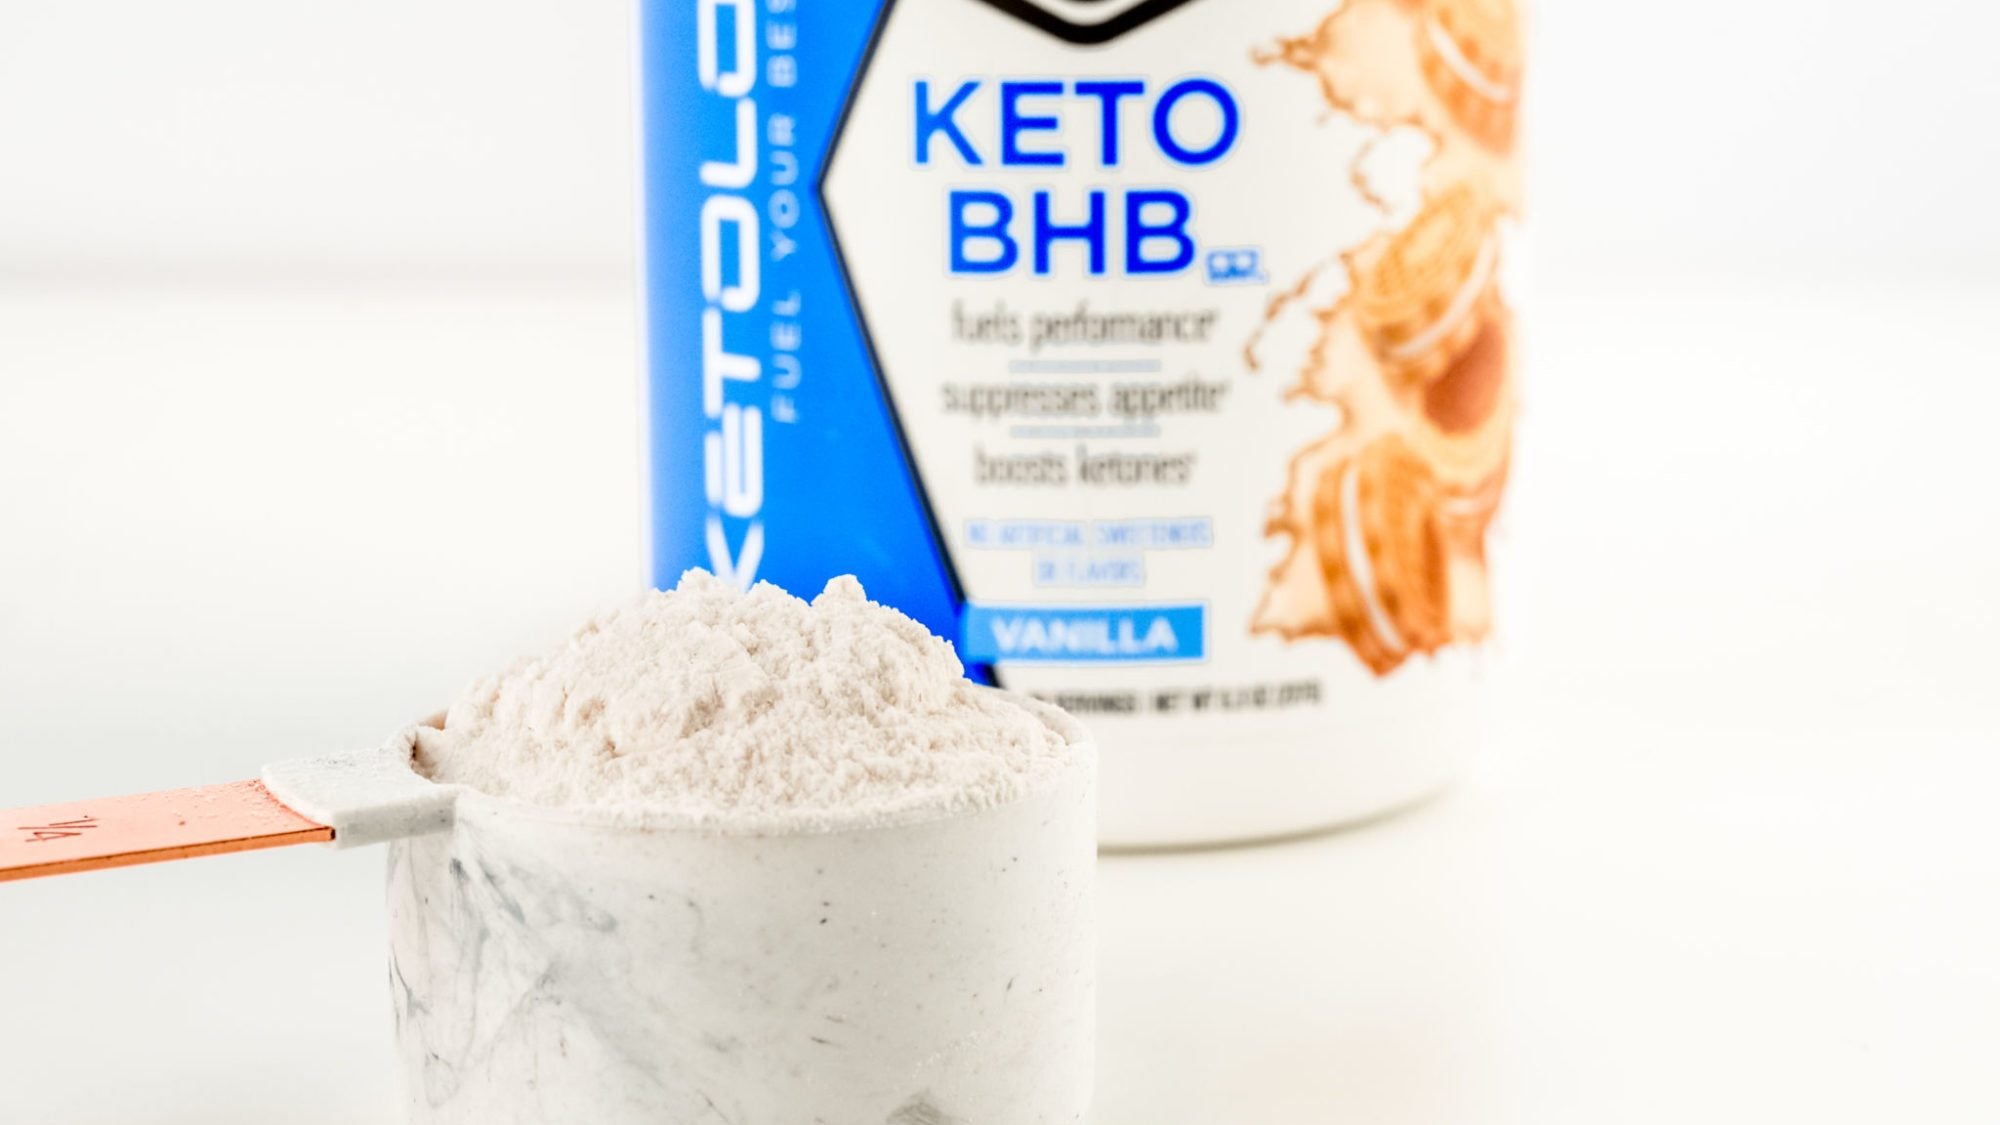 Keto BHB: Your Comprehensive Guide to Exogenous Ketone Supplements